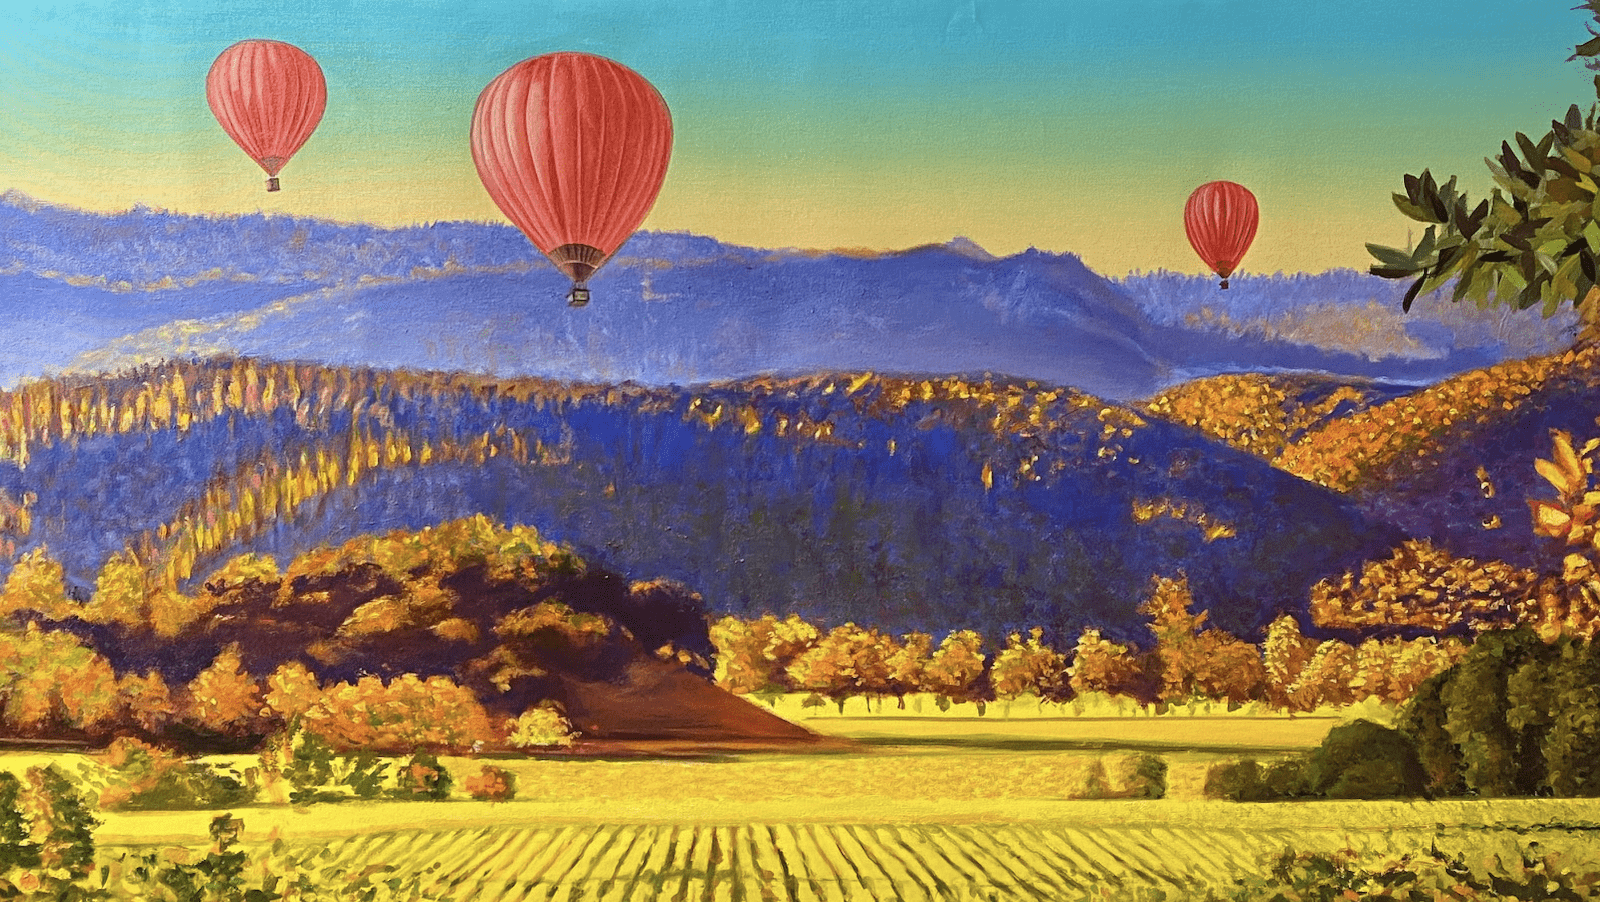 Painting of hot air balloons over Napa Valley for Mustard Celebration in Napa